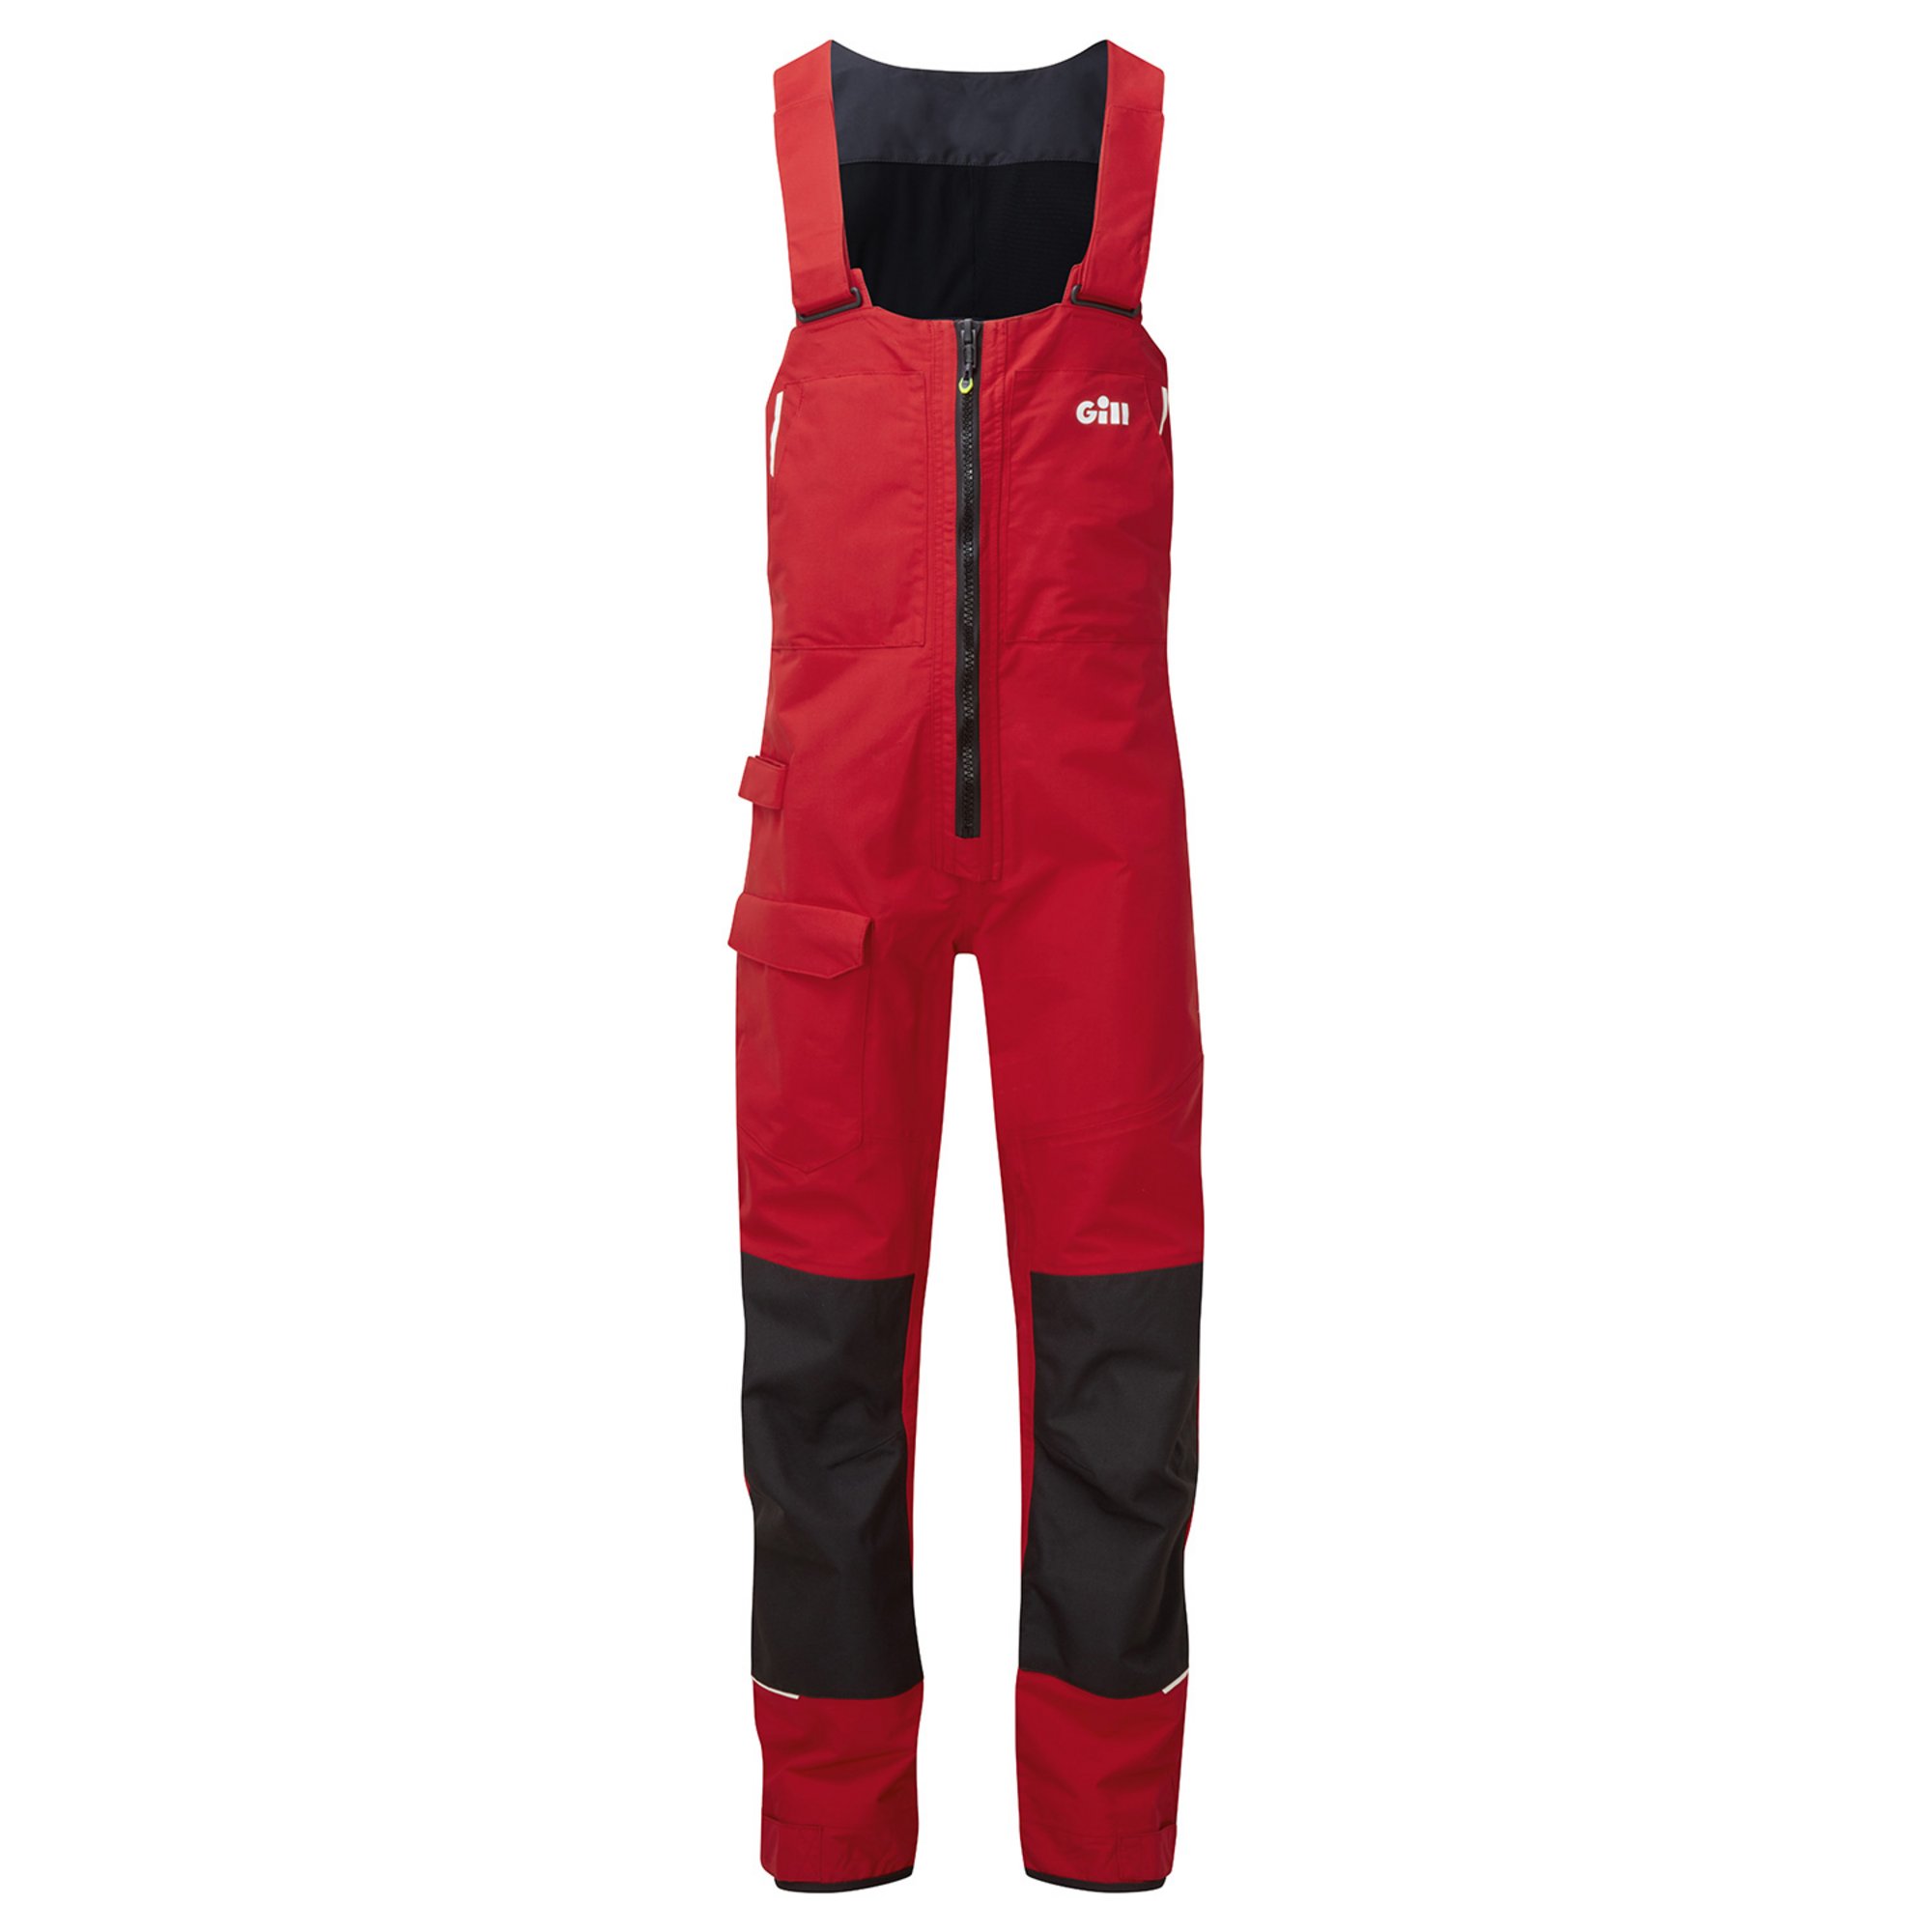 2019 Gill Race Sailing Trousers SILVER RS09 - Sailing - Sailing - Yacht -  Shore | Watersports Outlet